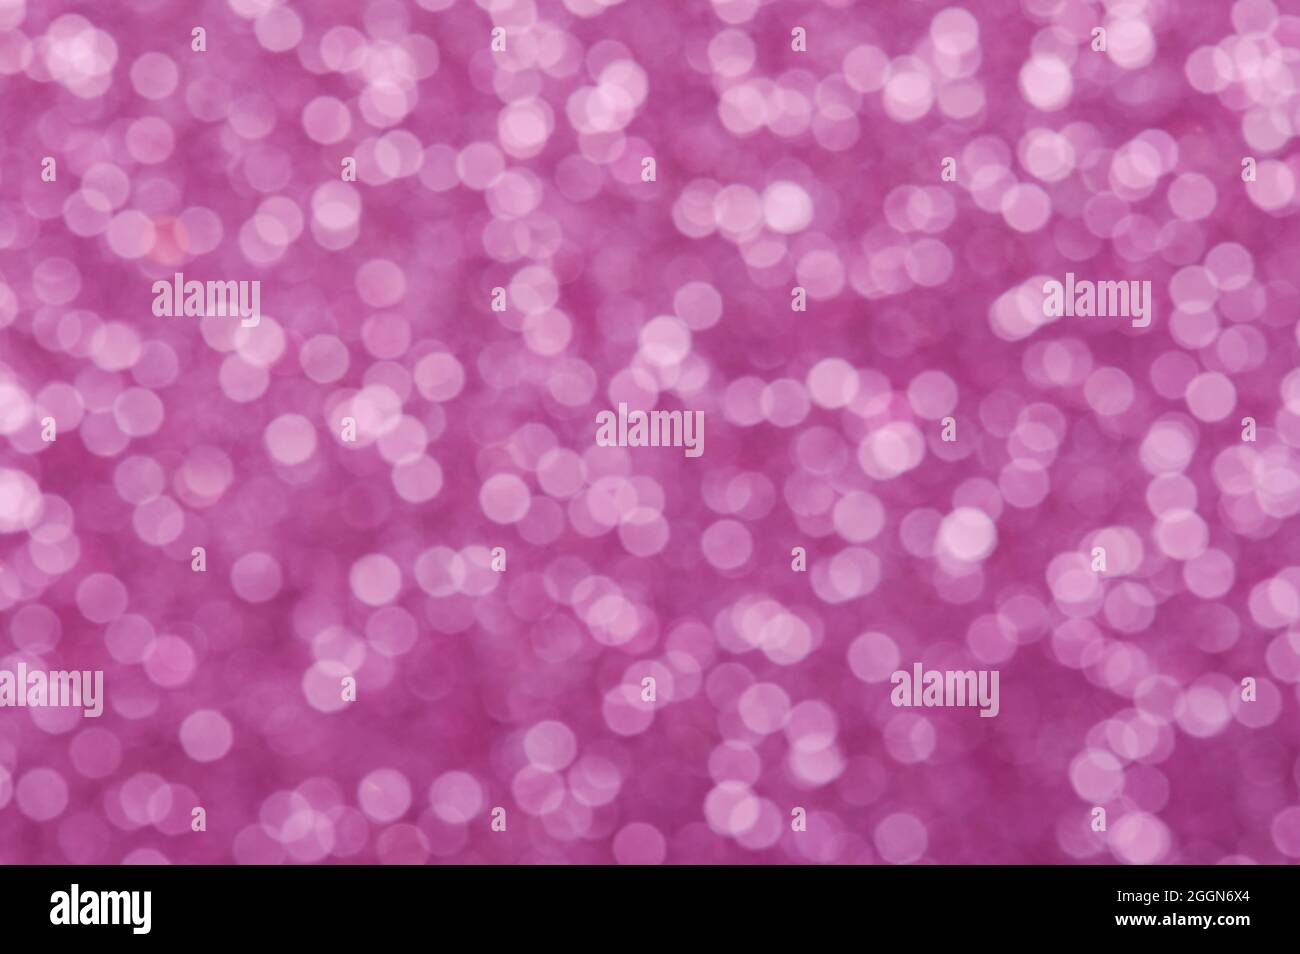 Blur sparkle white circles on pink background close up view Stock Photo